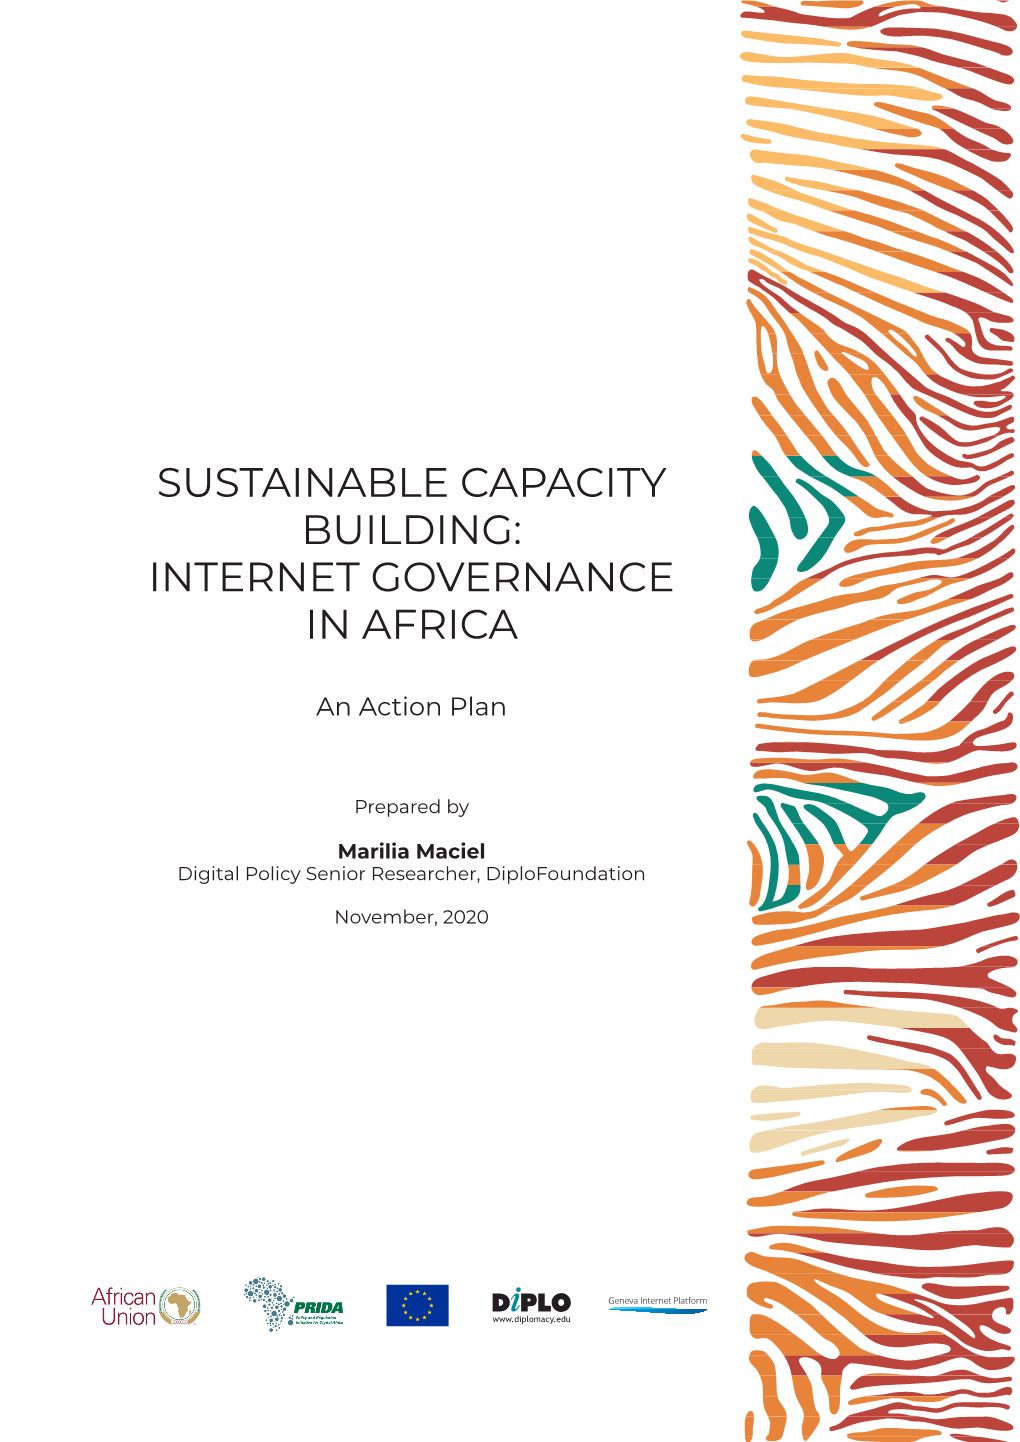 Sustainable Capacity Building: Internet Governance in Africa